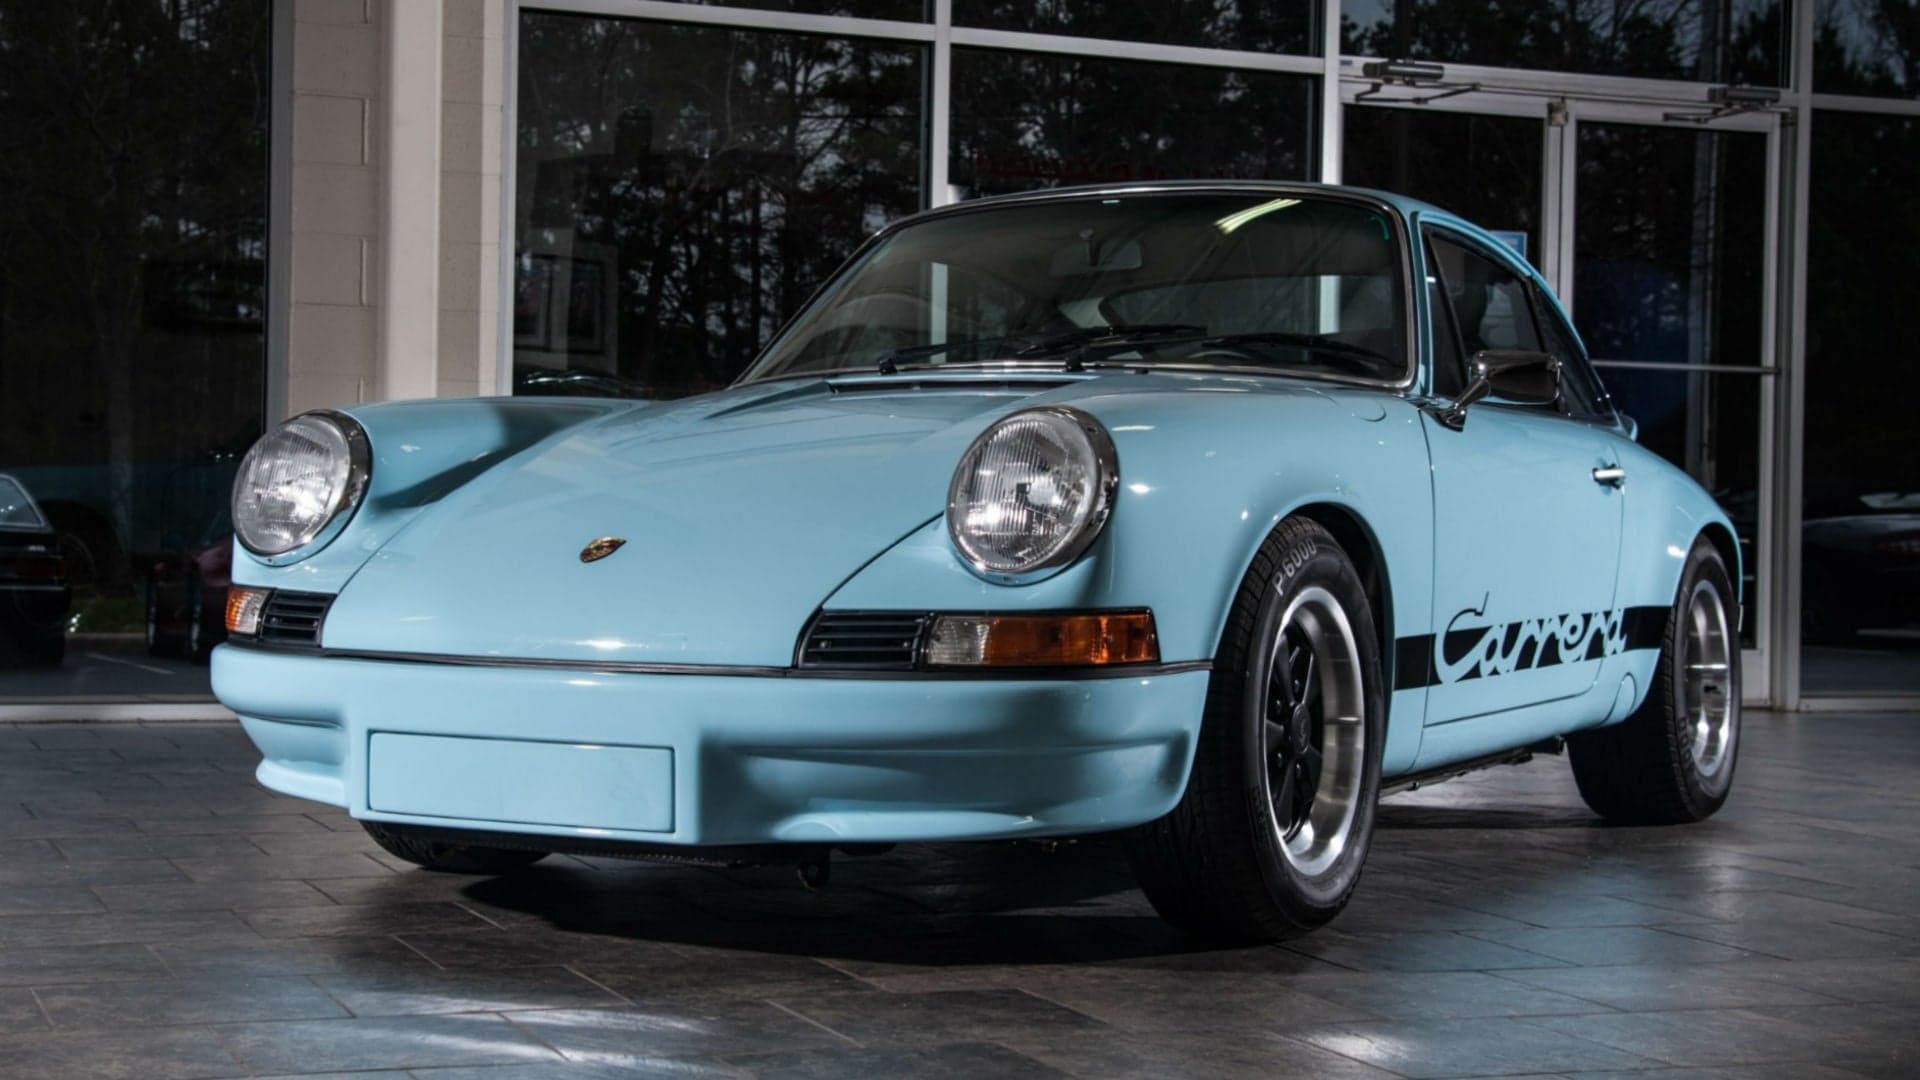 This 1987 Porsche 911 was Rebuilt as a Tribute to the Legendary Carrera RS 2.7